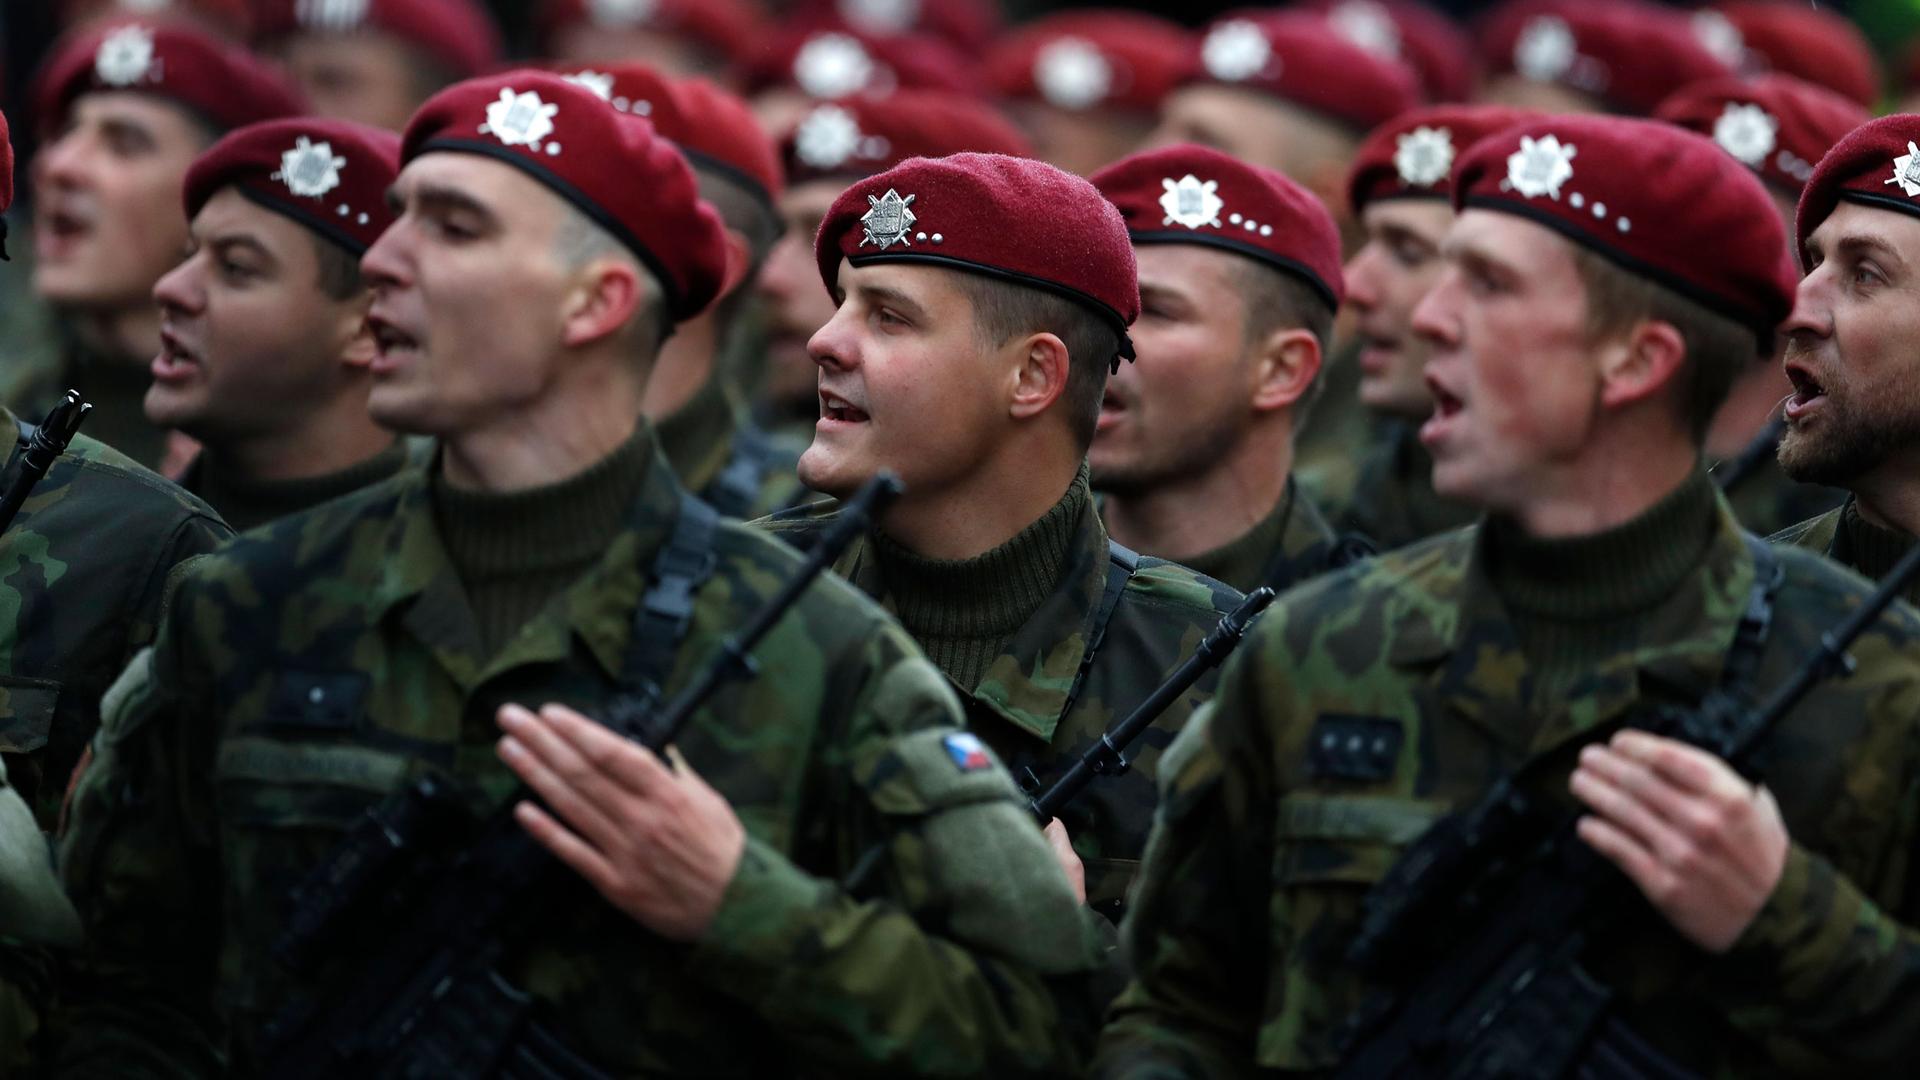 Soldiers march during a military parade marking 100th anniversary of the 1918 creation of the Czechoslovak state in Prague, Czech Republic, Sunday, Oct. 28, 2018. 